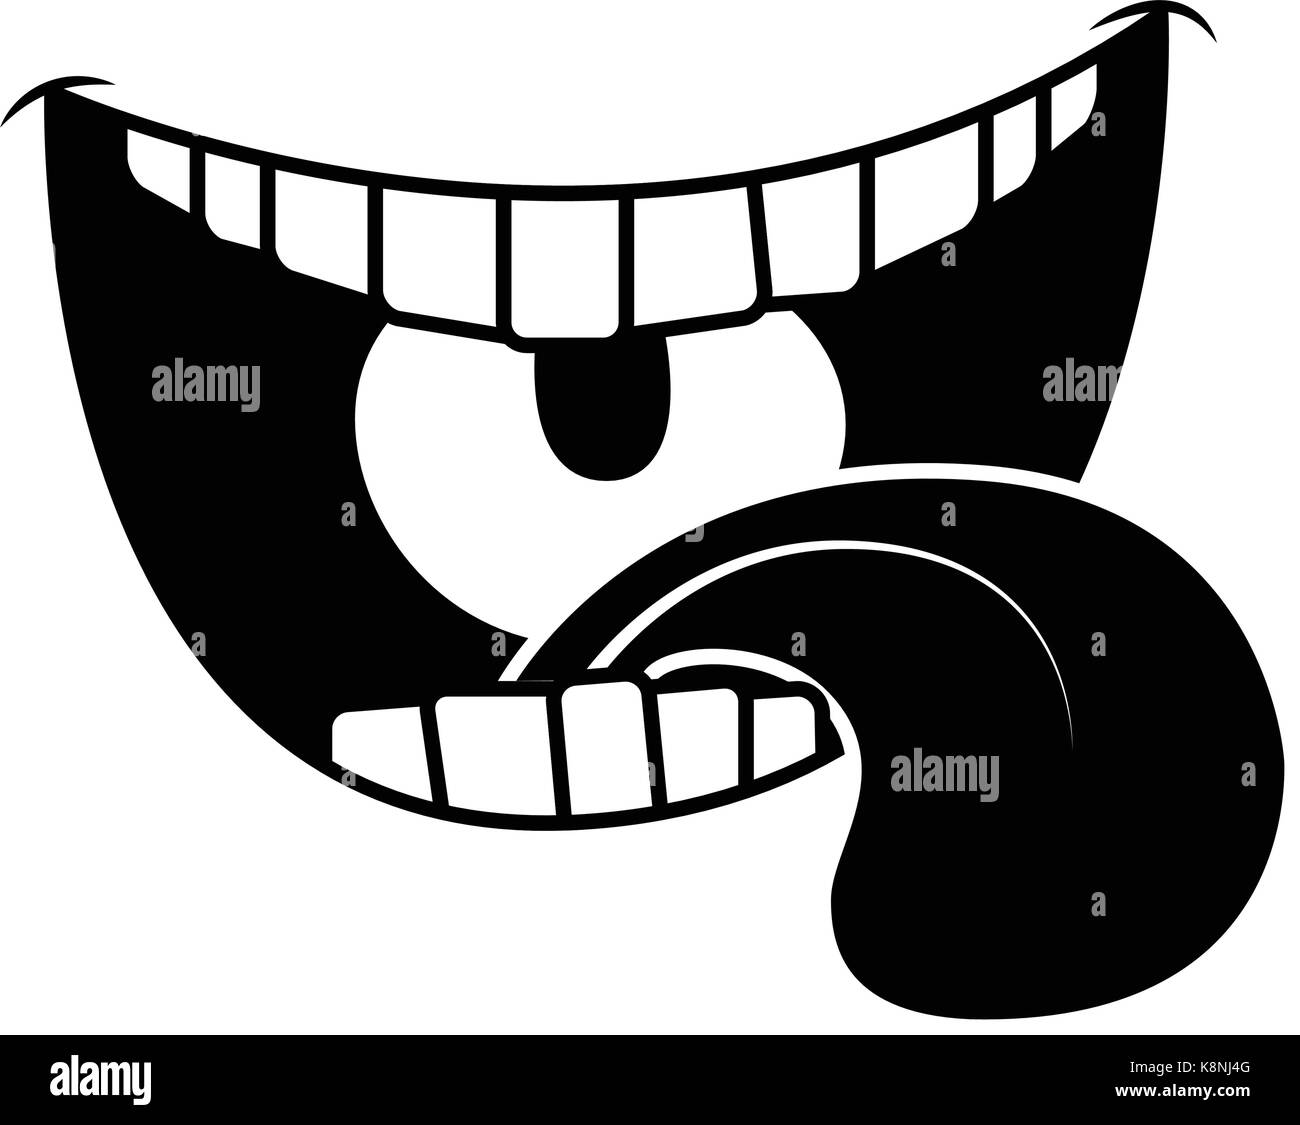 Cartoon smile, mouth, lips with teeth and tongue. silhouette vector illustration isolated on white background Stock Vector